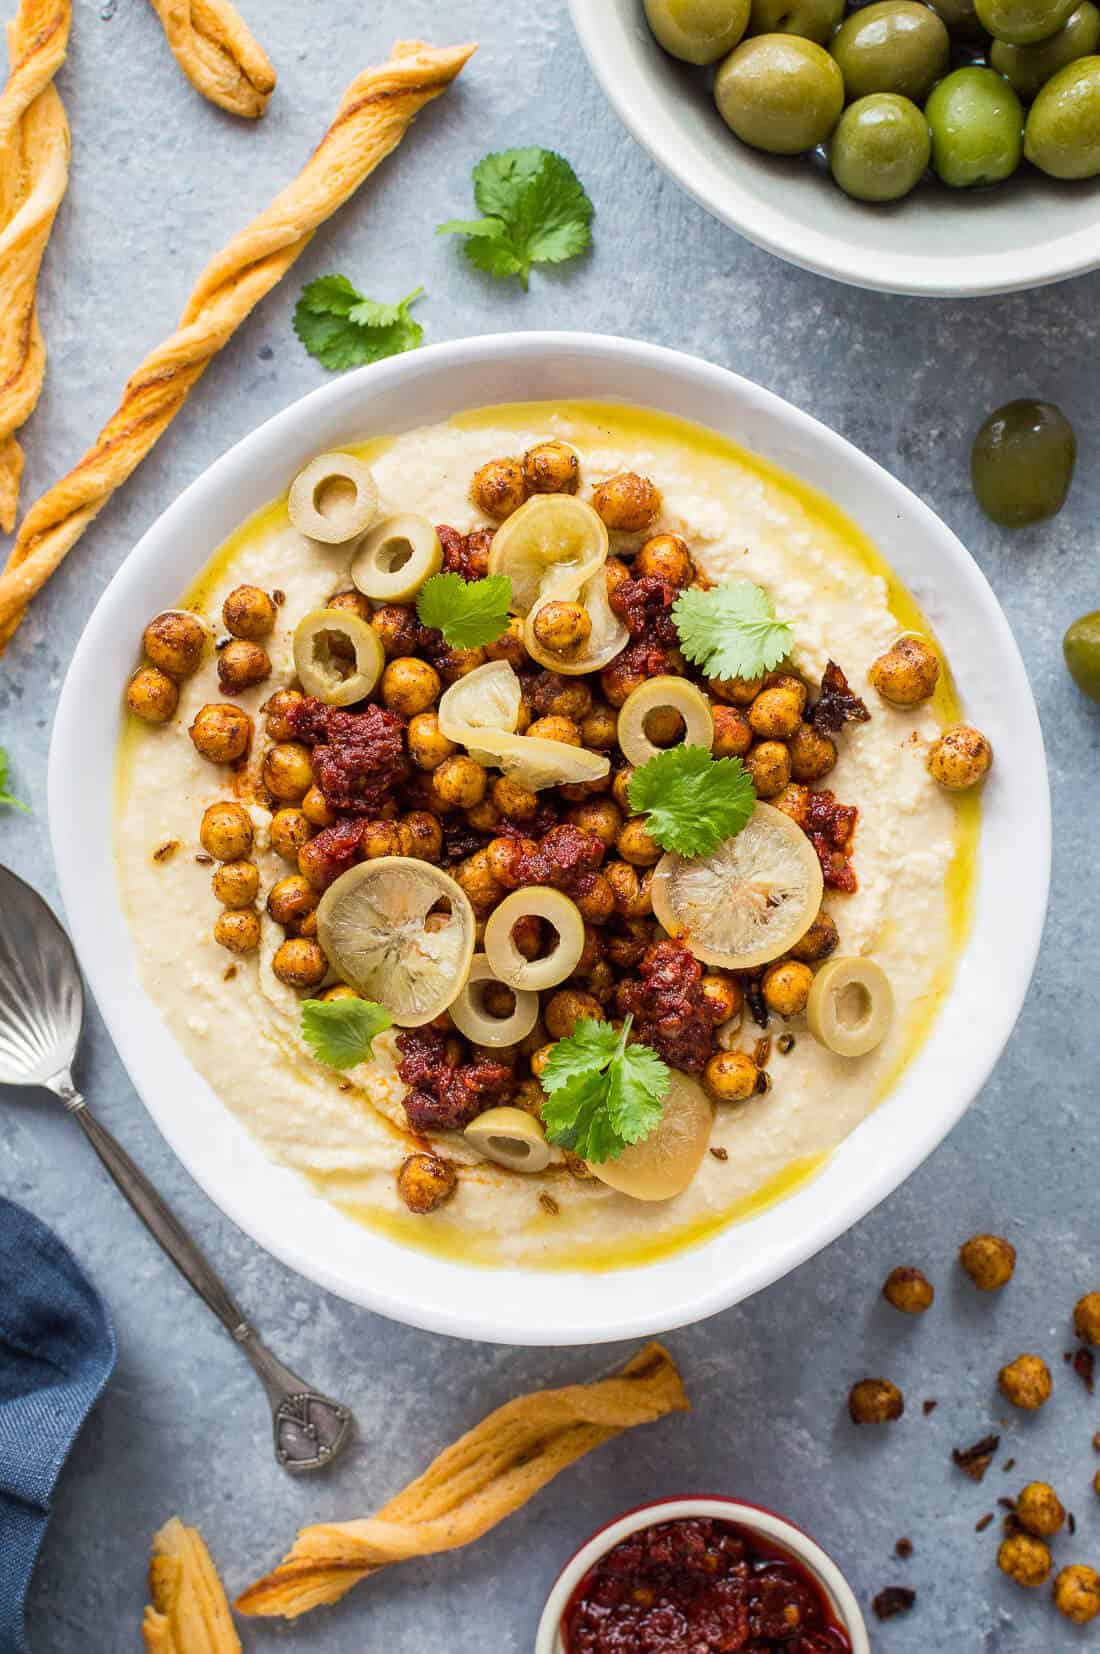 Hummus topped with crispy Ras el hanout roasted chickpeas, preserved lemon, olives and olive oil